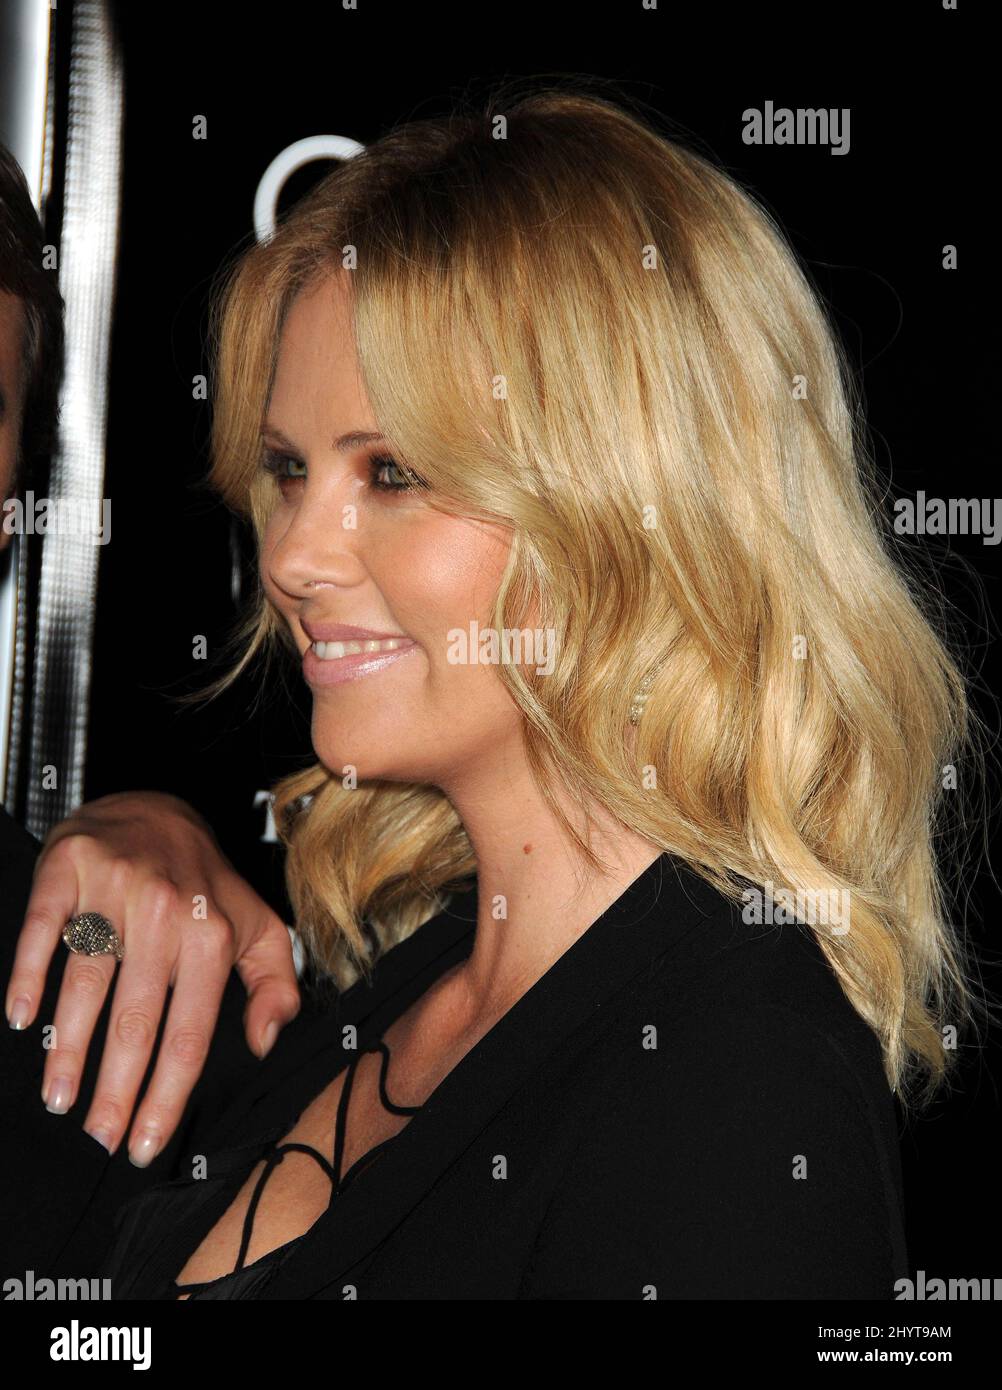 Charlize Theron attending the Battle in Seattle Screening, held at the Clarity Theater in Beverly Hills. Stock Photo